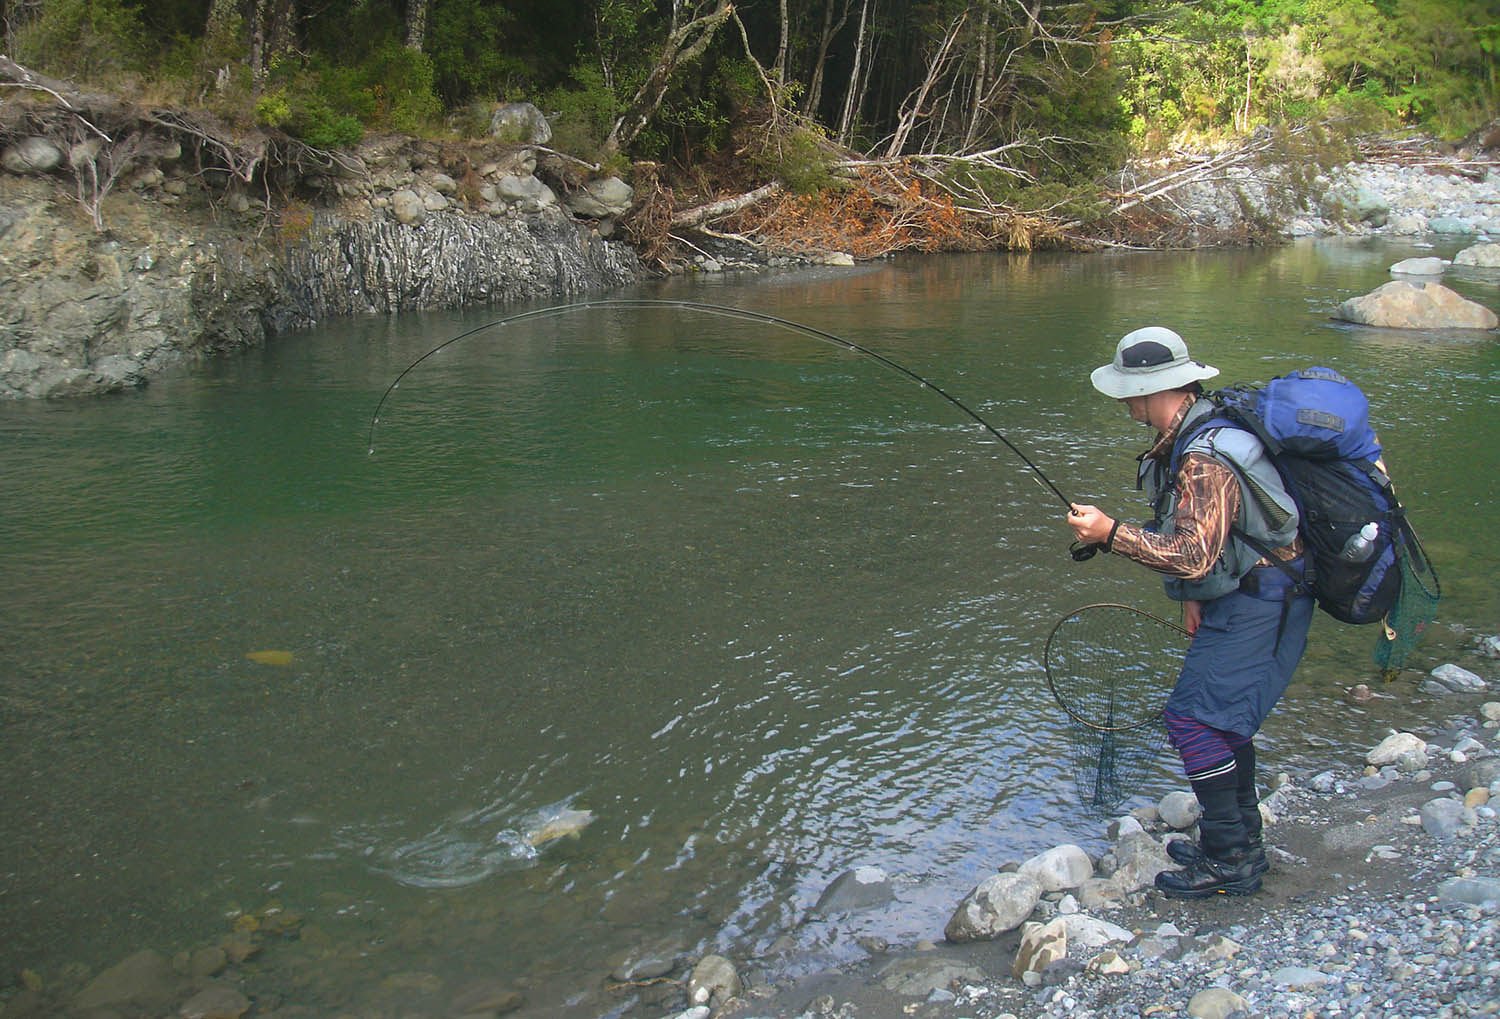 Fisherman on a New Zealand backcountry river, bringing in a trout, showinging strength and curve of bending TVO BVK 5wt fly fishing rod 